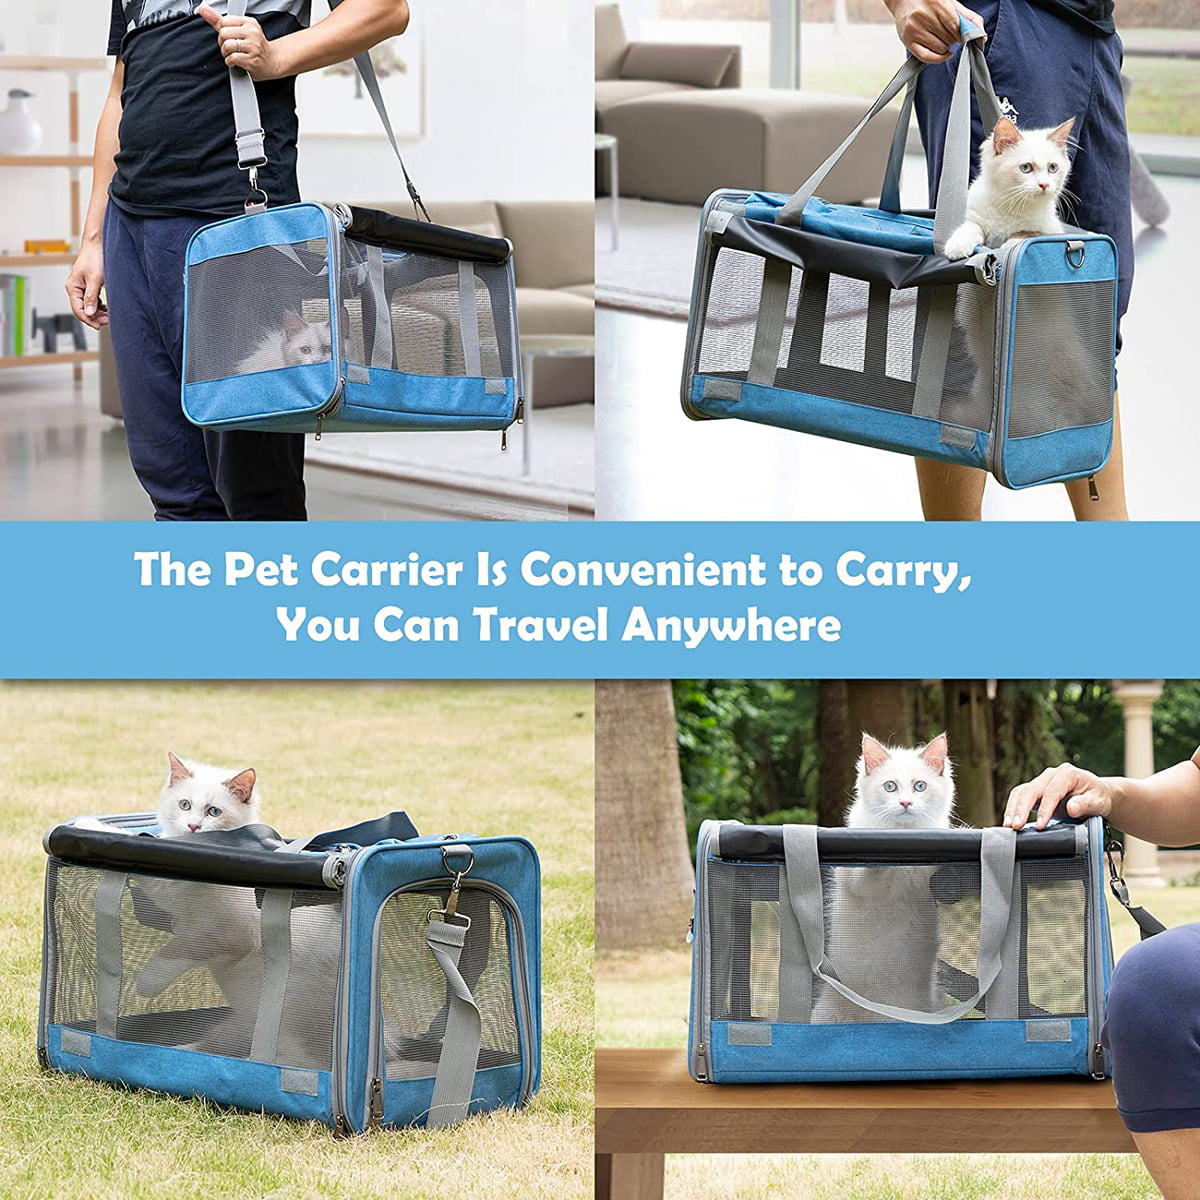 VEAGIA Cat Carrier,Pet Carrier,Cat Carriers for Medium Cats Under